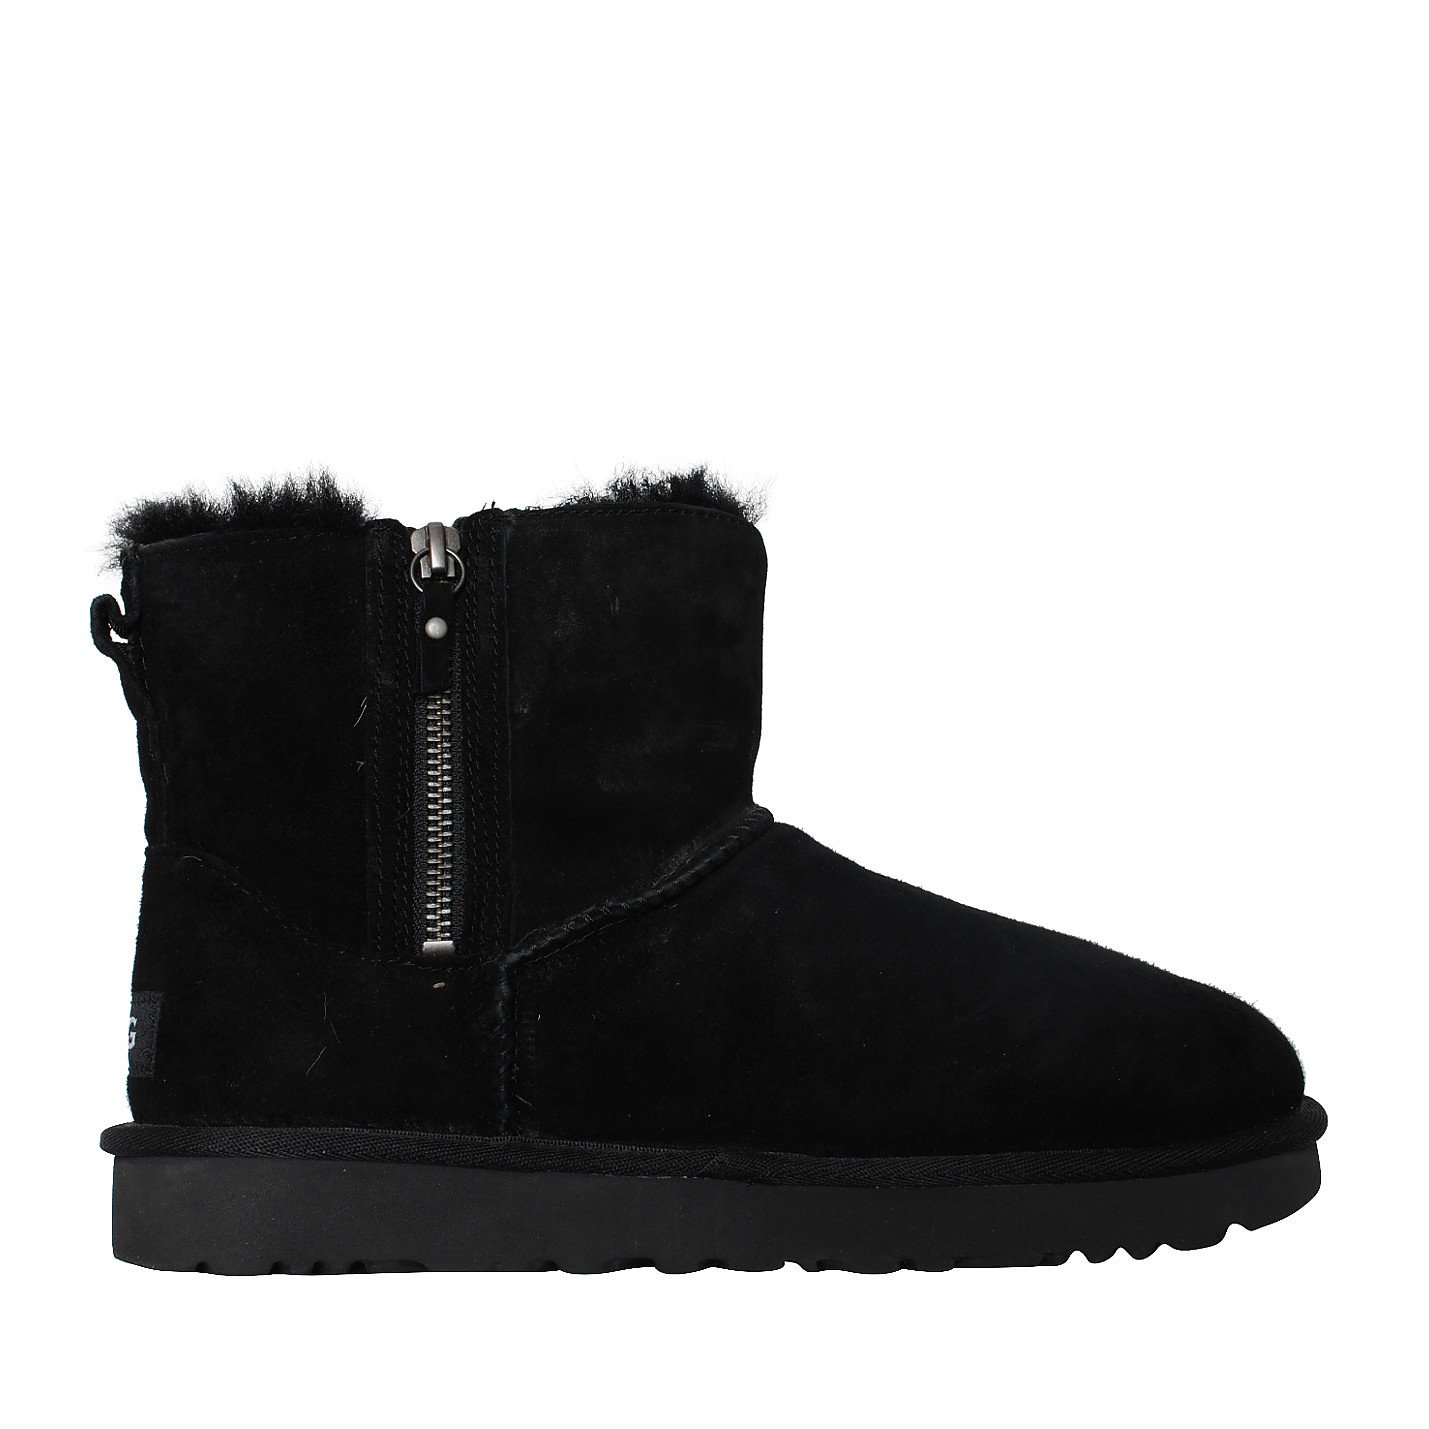 UGG Australia Ankle Boots